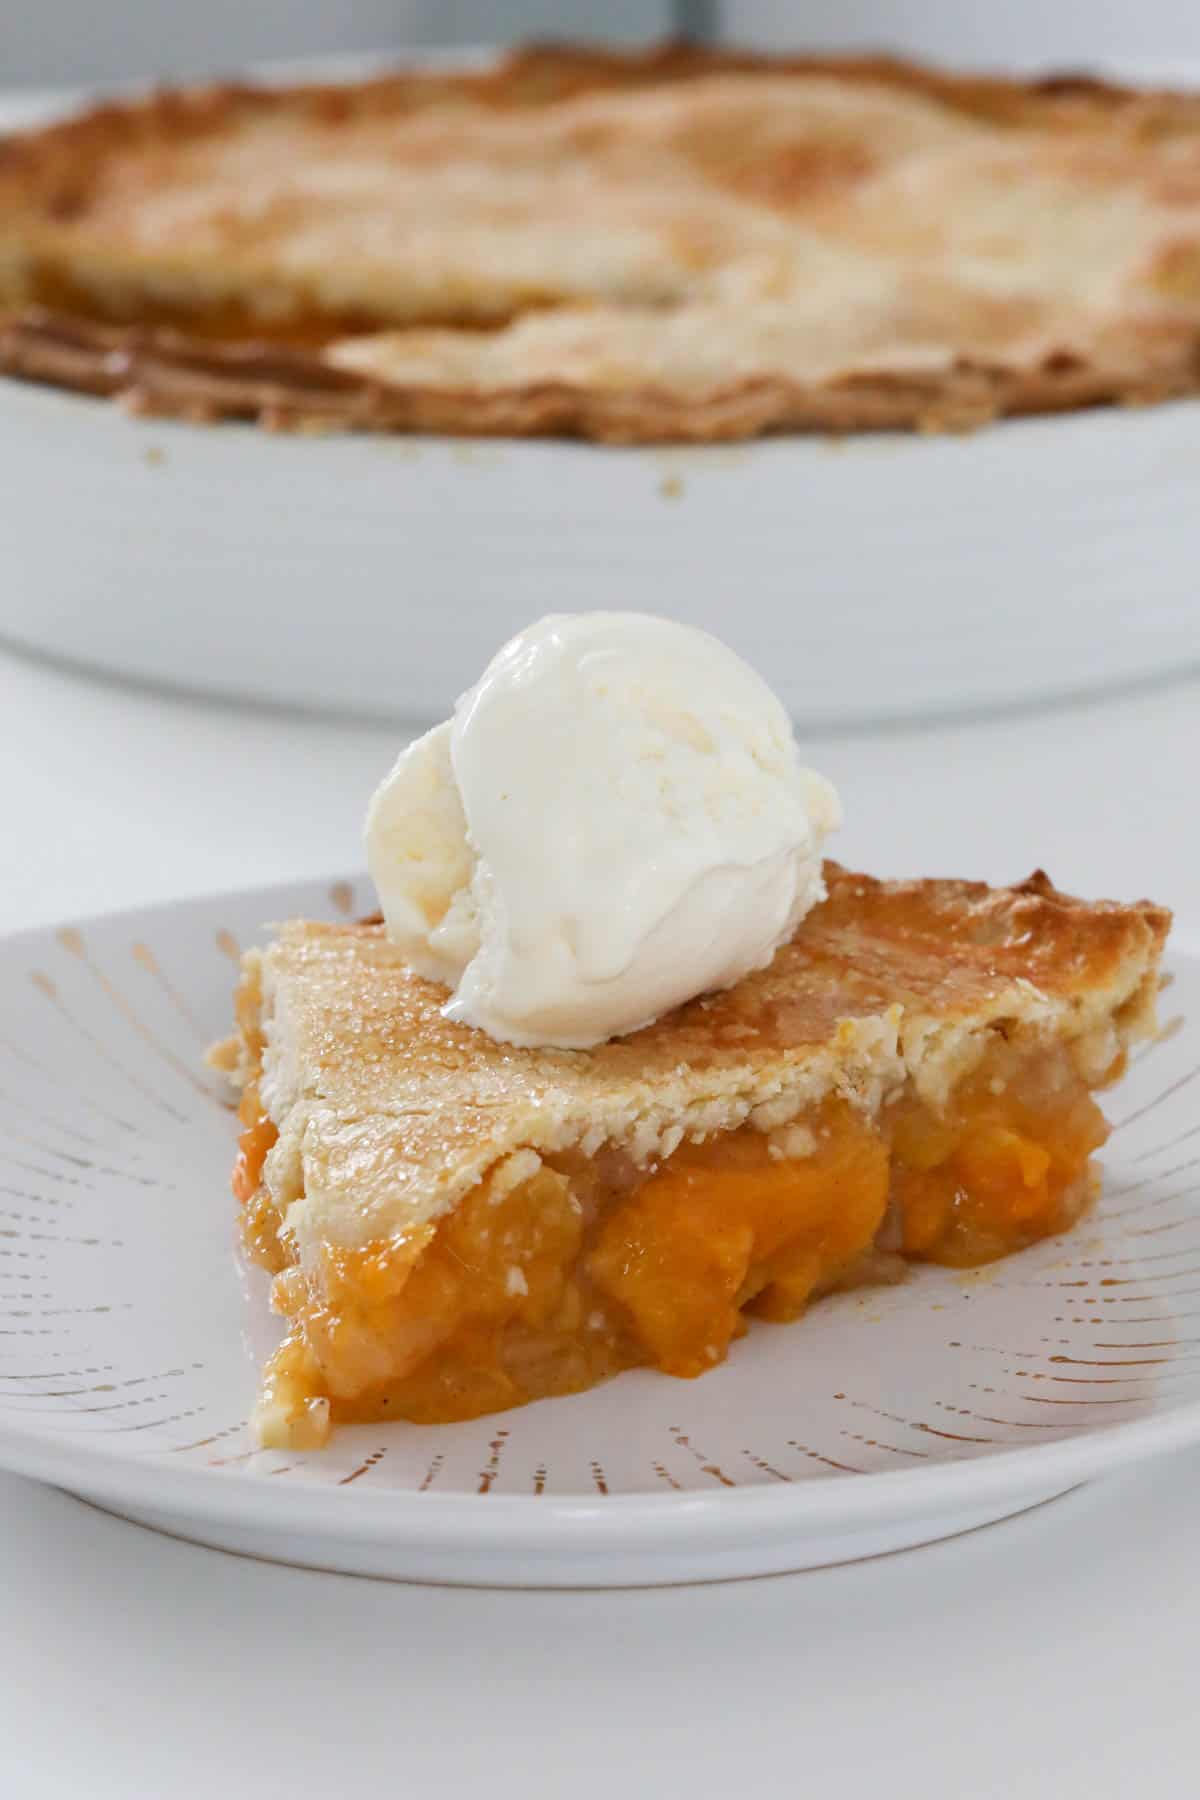 A slice of apricot pie on a plate with a scoop of ice cream on top.